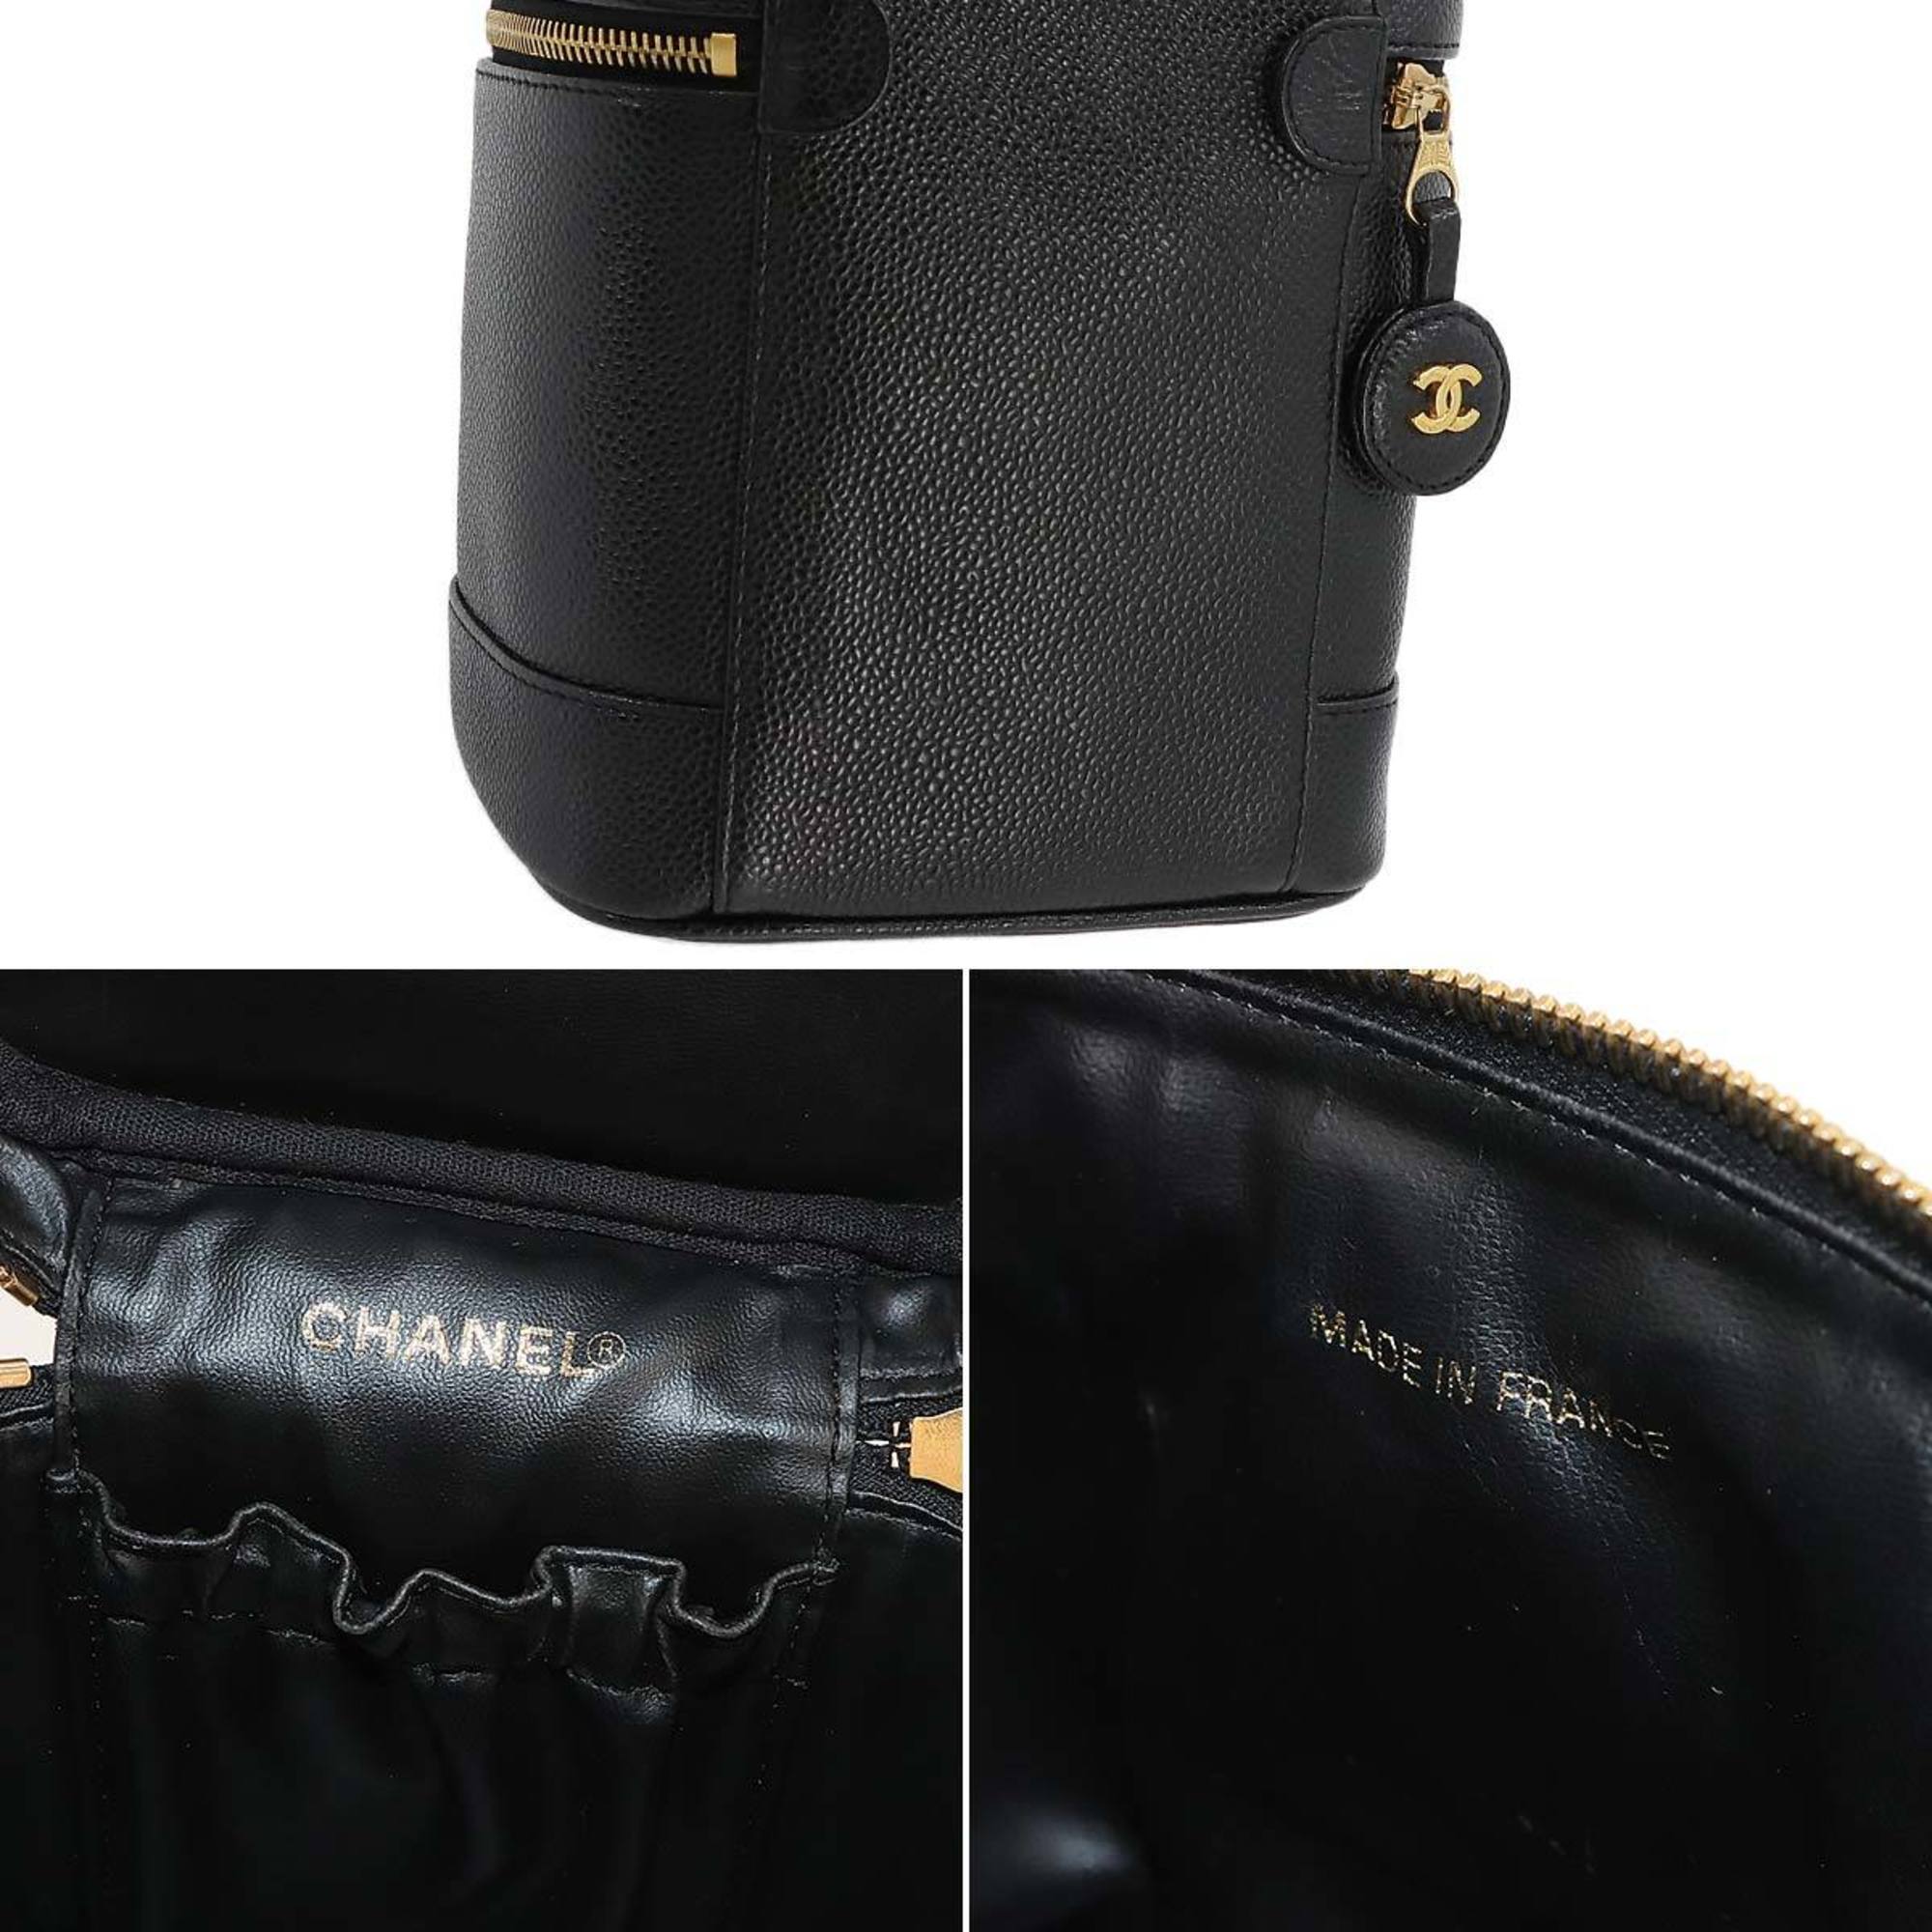 CHANEL Vanity Hand Bag Caviar Skin Leather Black A01998 Coco Mark Gold Hardware